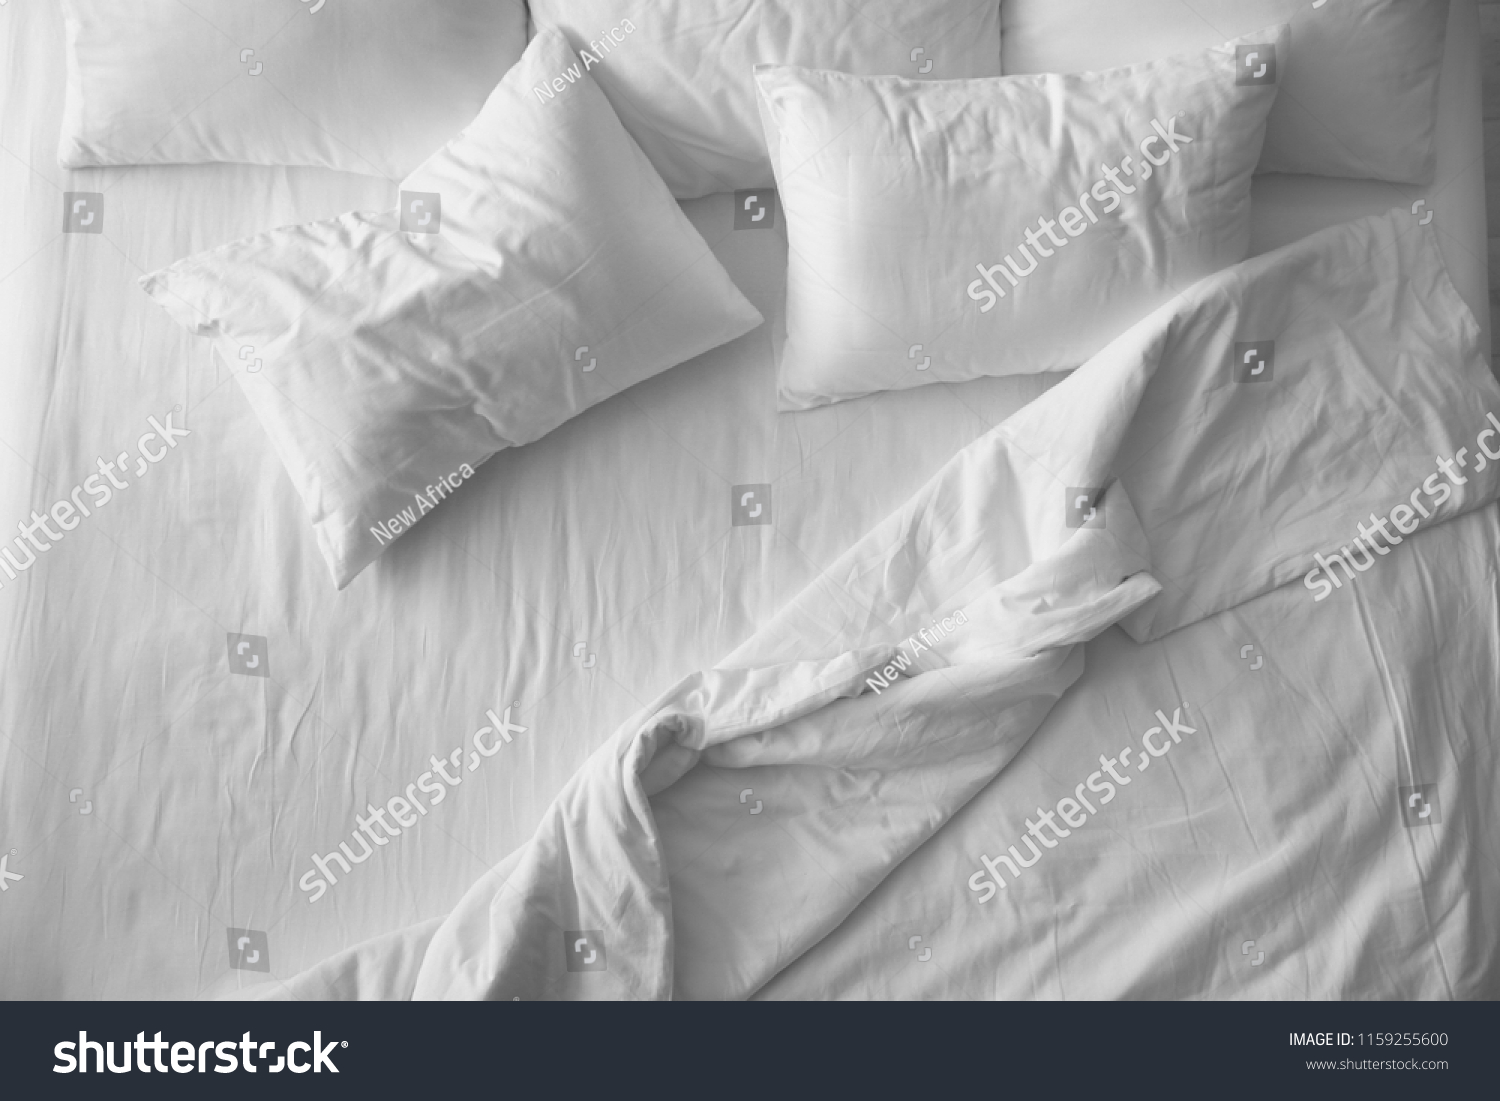 Soft pillows on comfortable bed, top view #1159255600